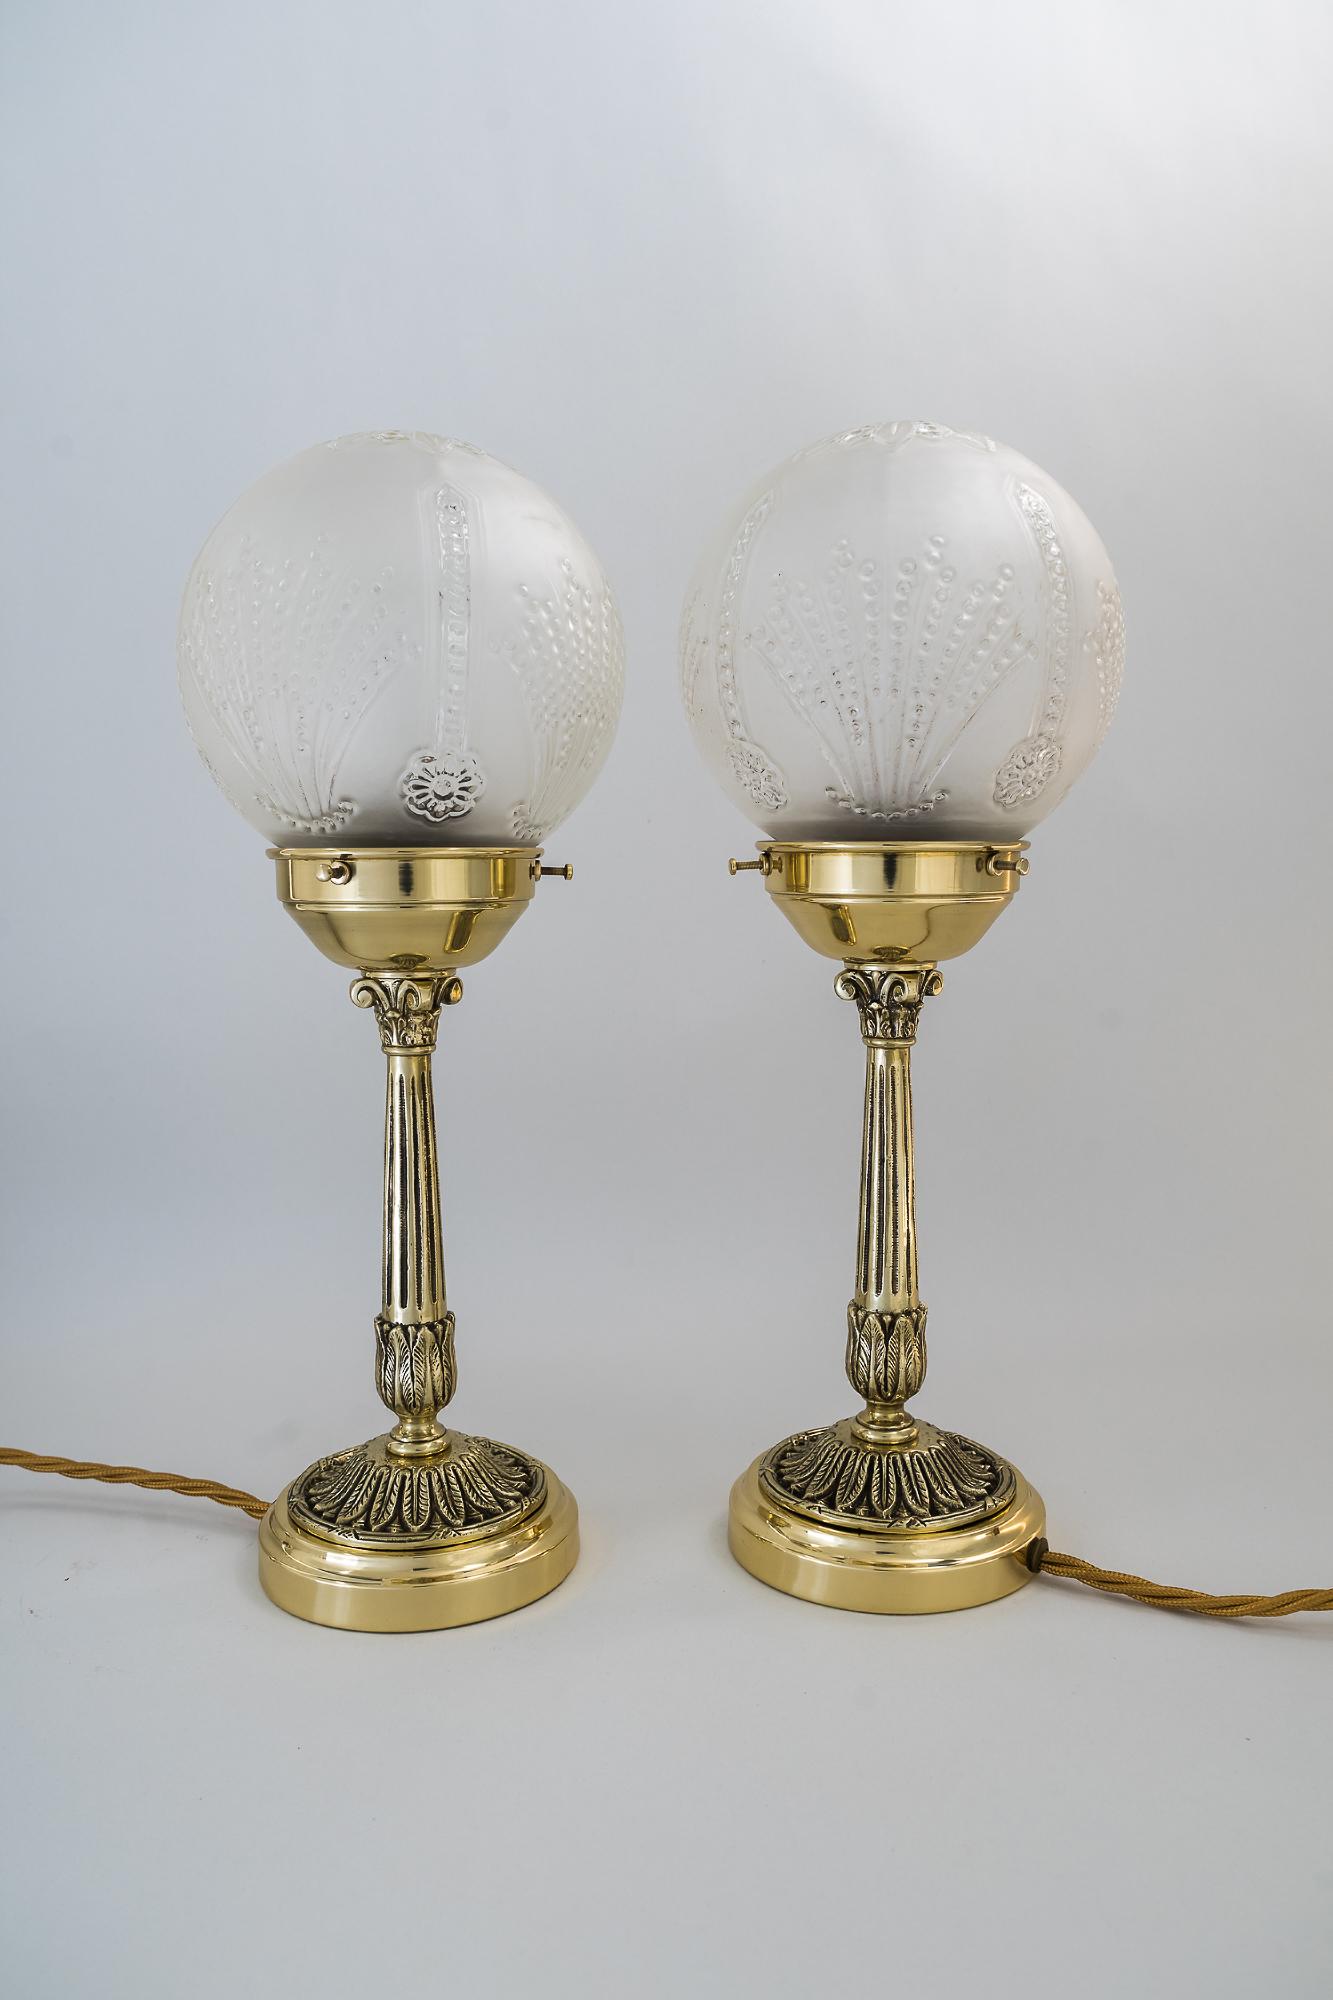 Two table lamps, Vienna, circa 1920s
Brass polished and stove enamelled
Original glass.